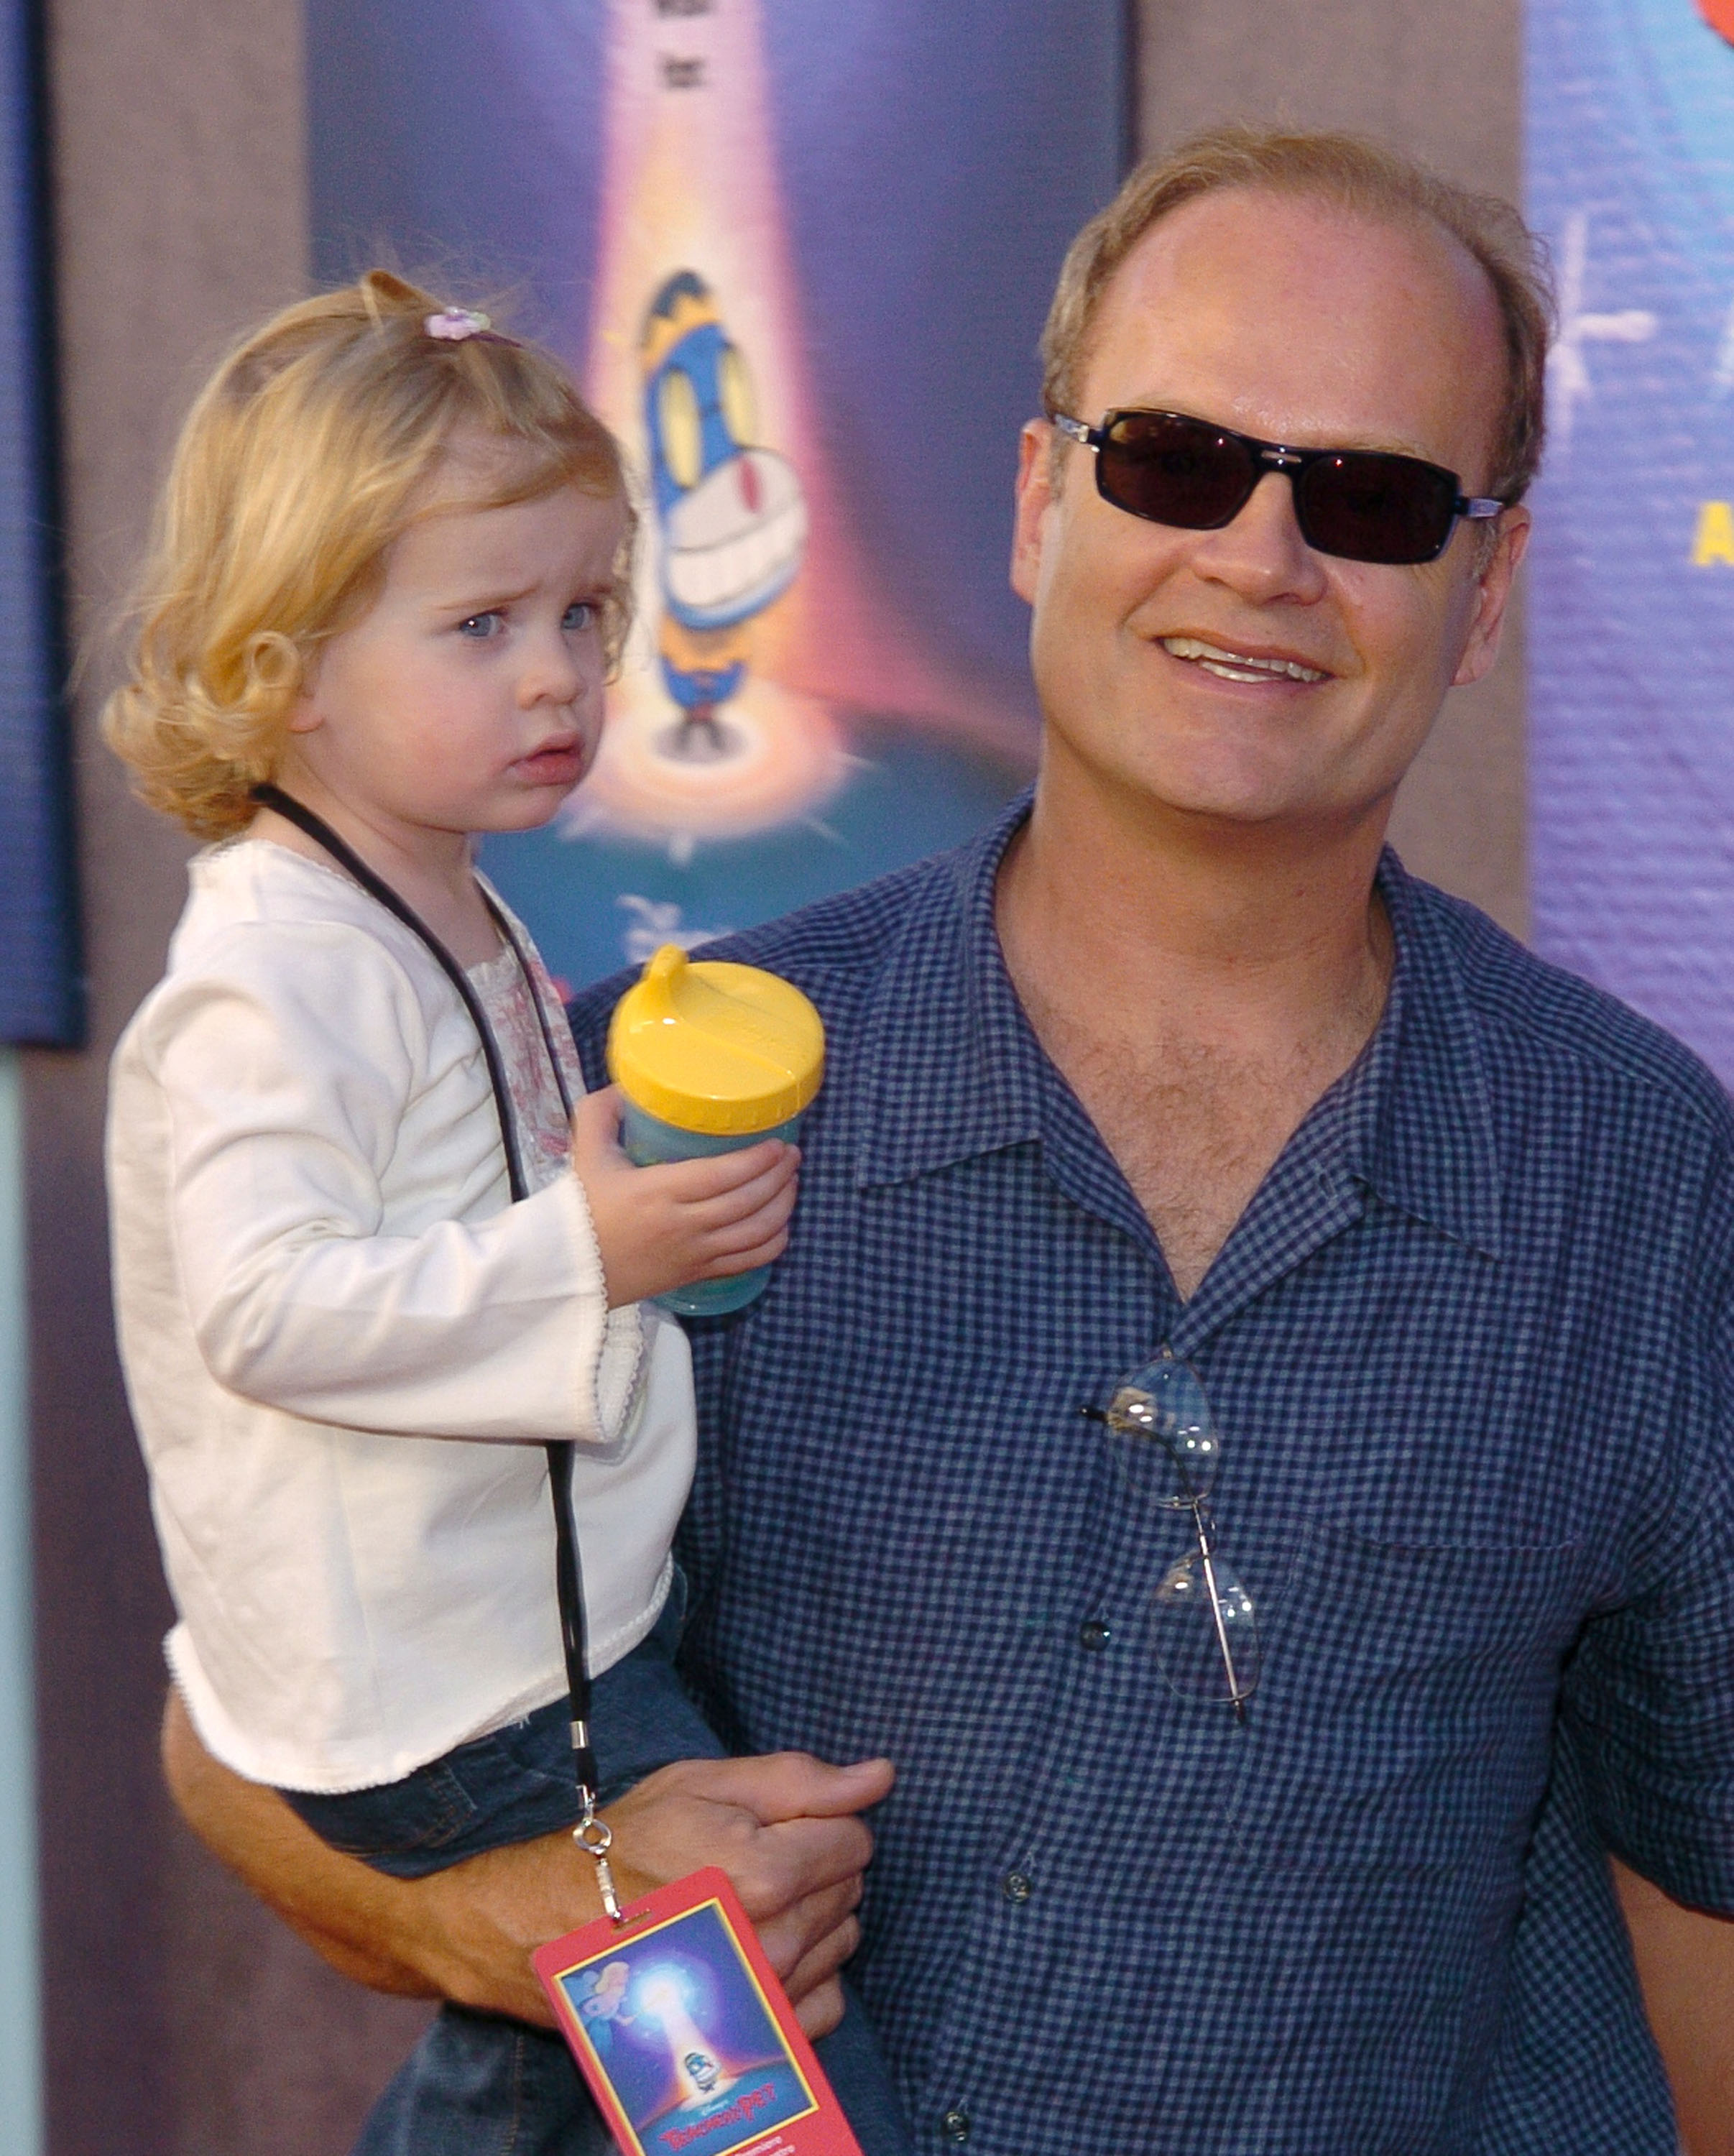 Kelsey Grammer and daughter Mason during the premiere of Disney's "Teacher's Pet" at the El Capitan Theatre in Hollywood, California | Source: Getty Images